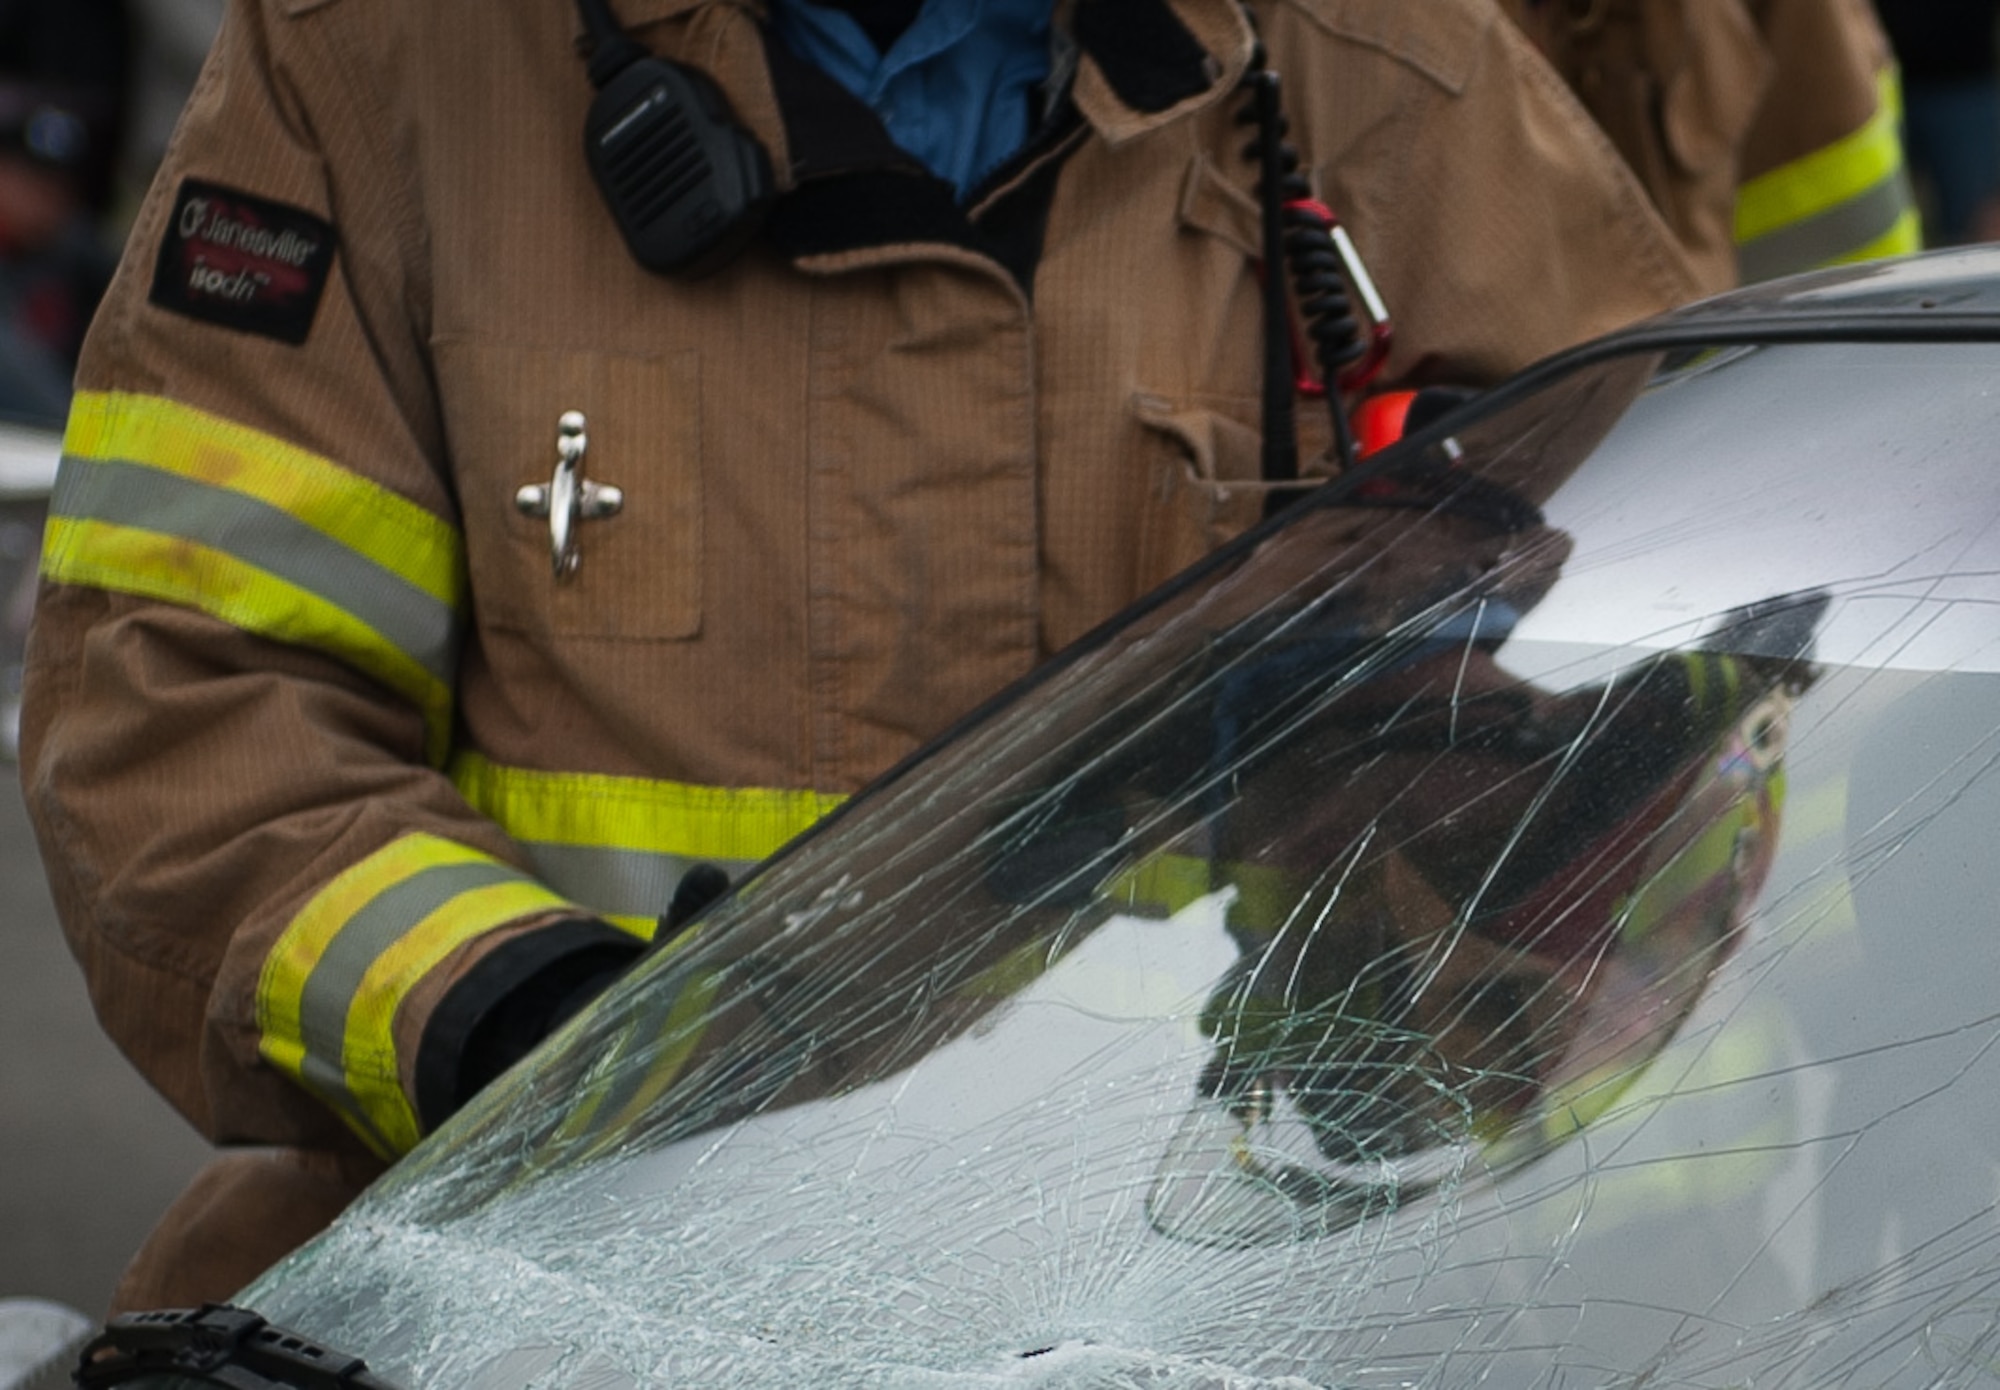 A firefighter assigned to the 786th Civil Engineer Squadron performs a vehicle extrication during an open house event training exercise Oct. 8, 2016, at Ramstein Air Base, Germany. Vehicle extrication is the process of removing a vehicle from around a person who has been involved in a motor vehicle accident, when conventional means of exit are impossible or inadvisable. (U.S. Air Force photo by Airman 1st Class Lane T. Plummer)